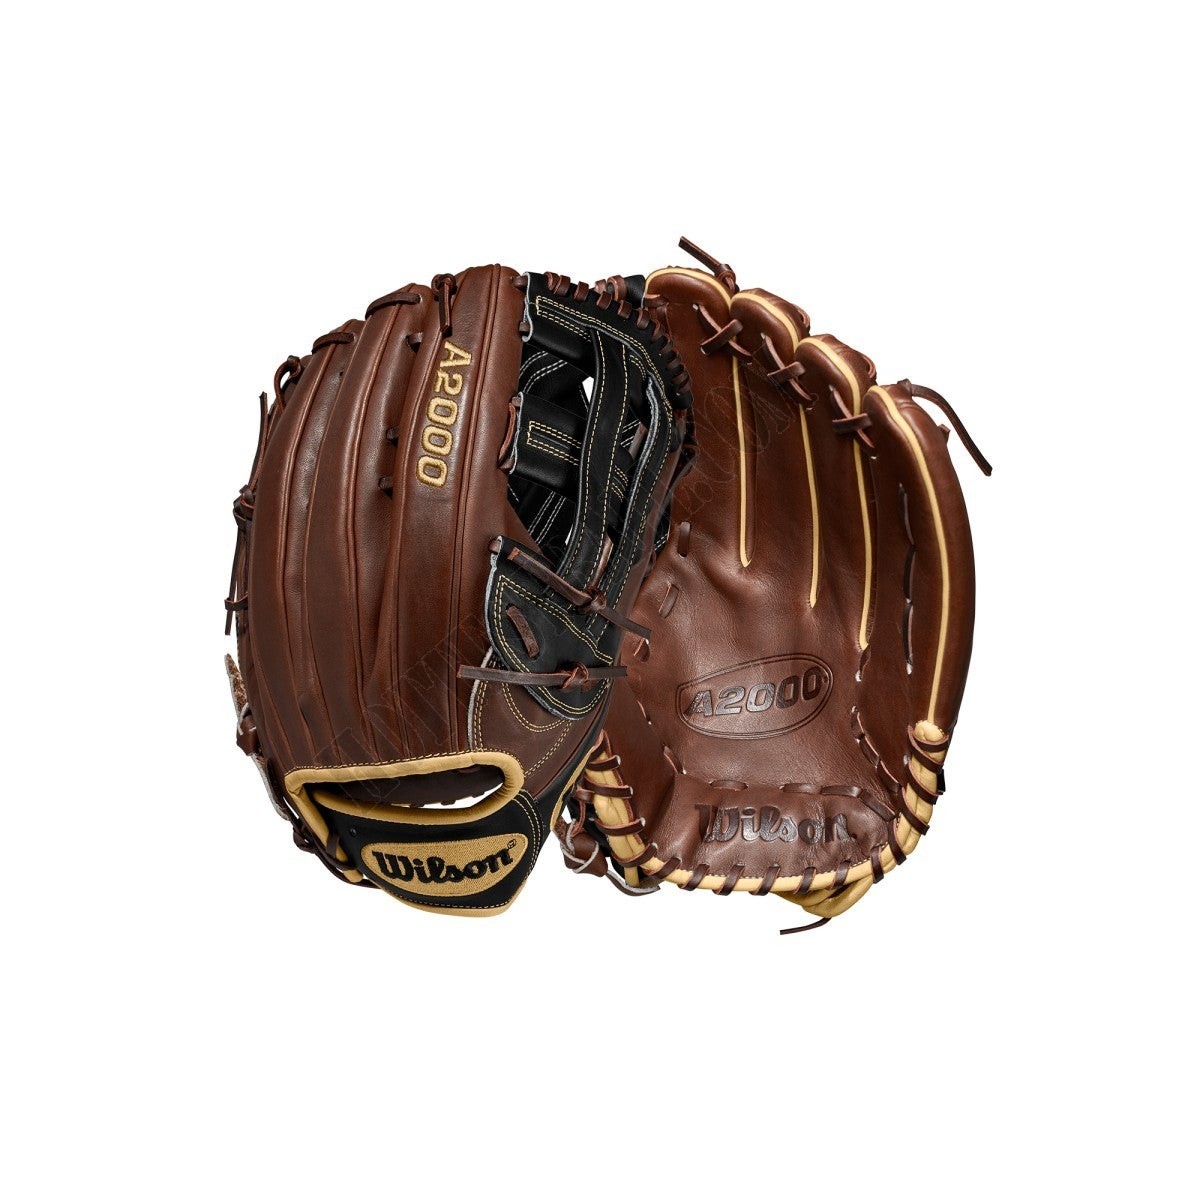 2020 A2000 1799 12.75" Outfield Baseball Glove ● Wilson Promotions - 2020 A2000 1799 12.75" Outfield Baseball Glove ● Wilson Promotions